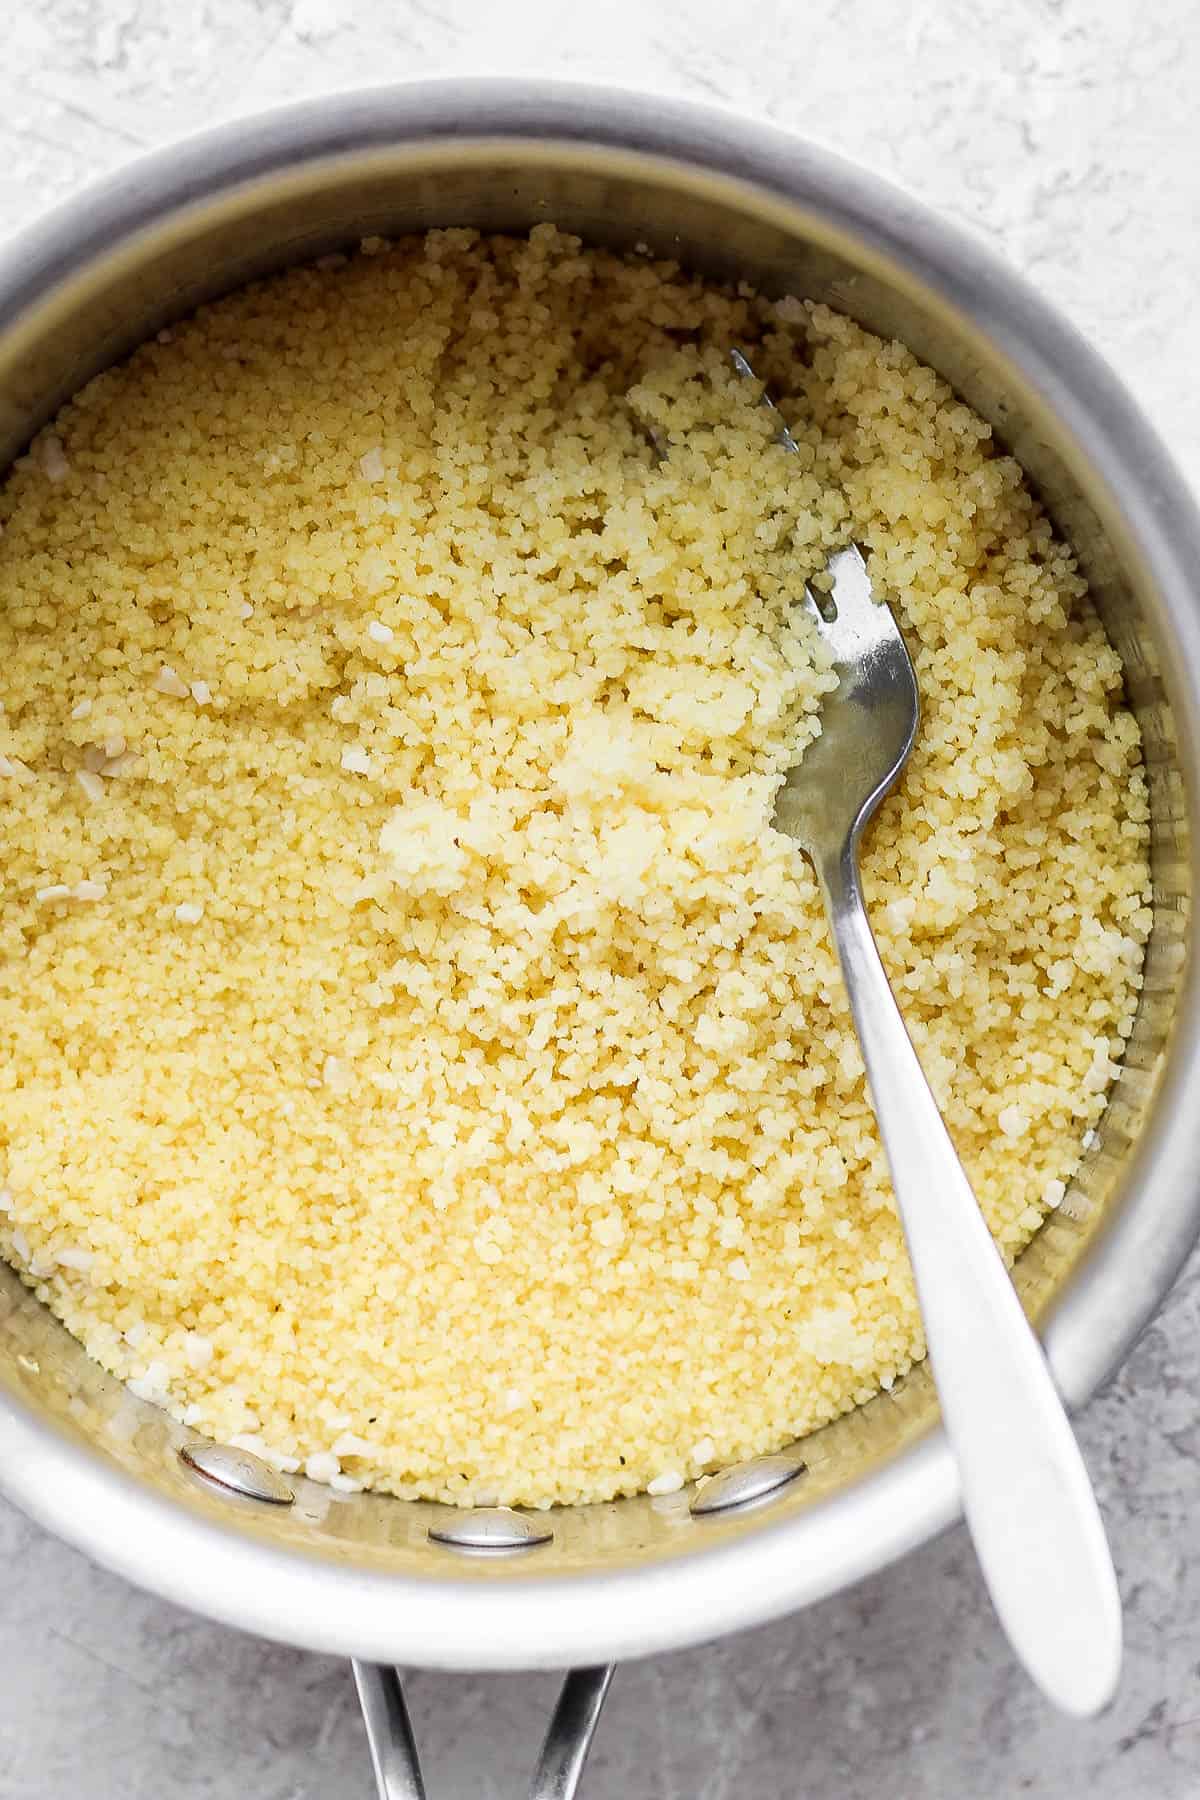 Steamed couscous being fluffed with a fork.